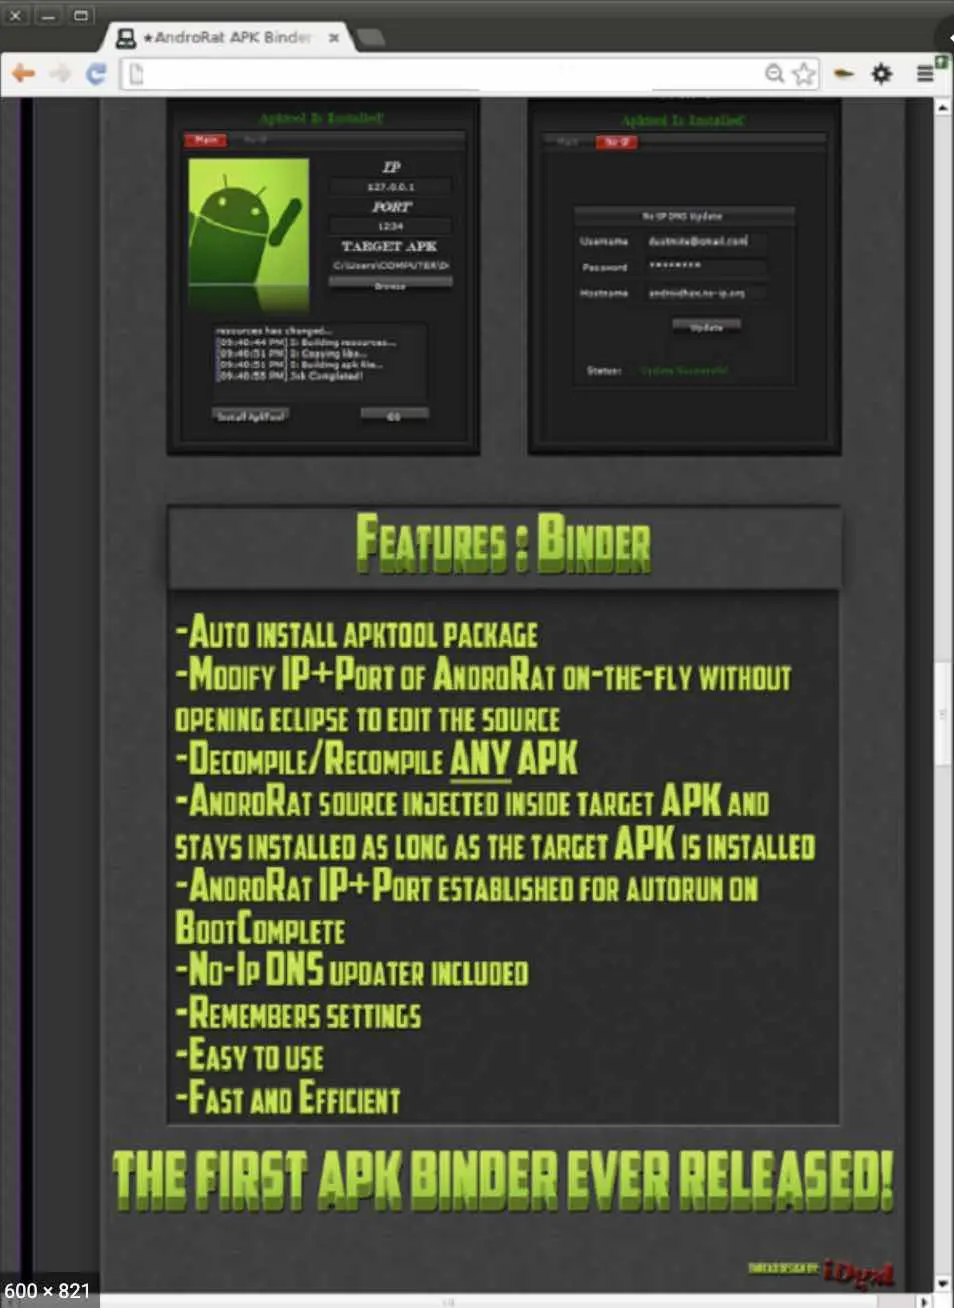 android phone hacking software free download